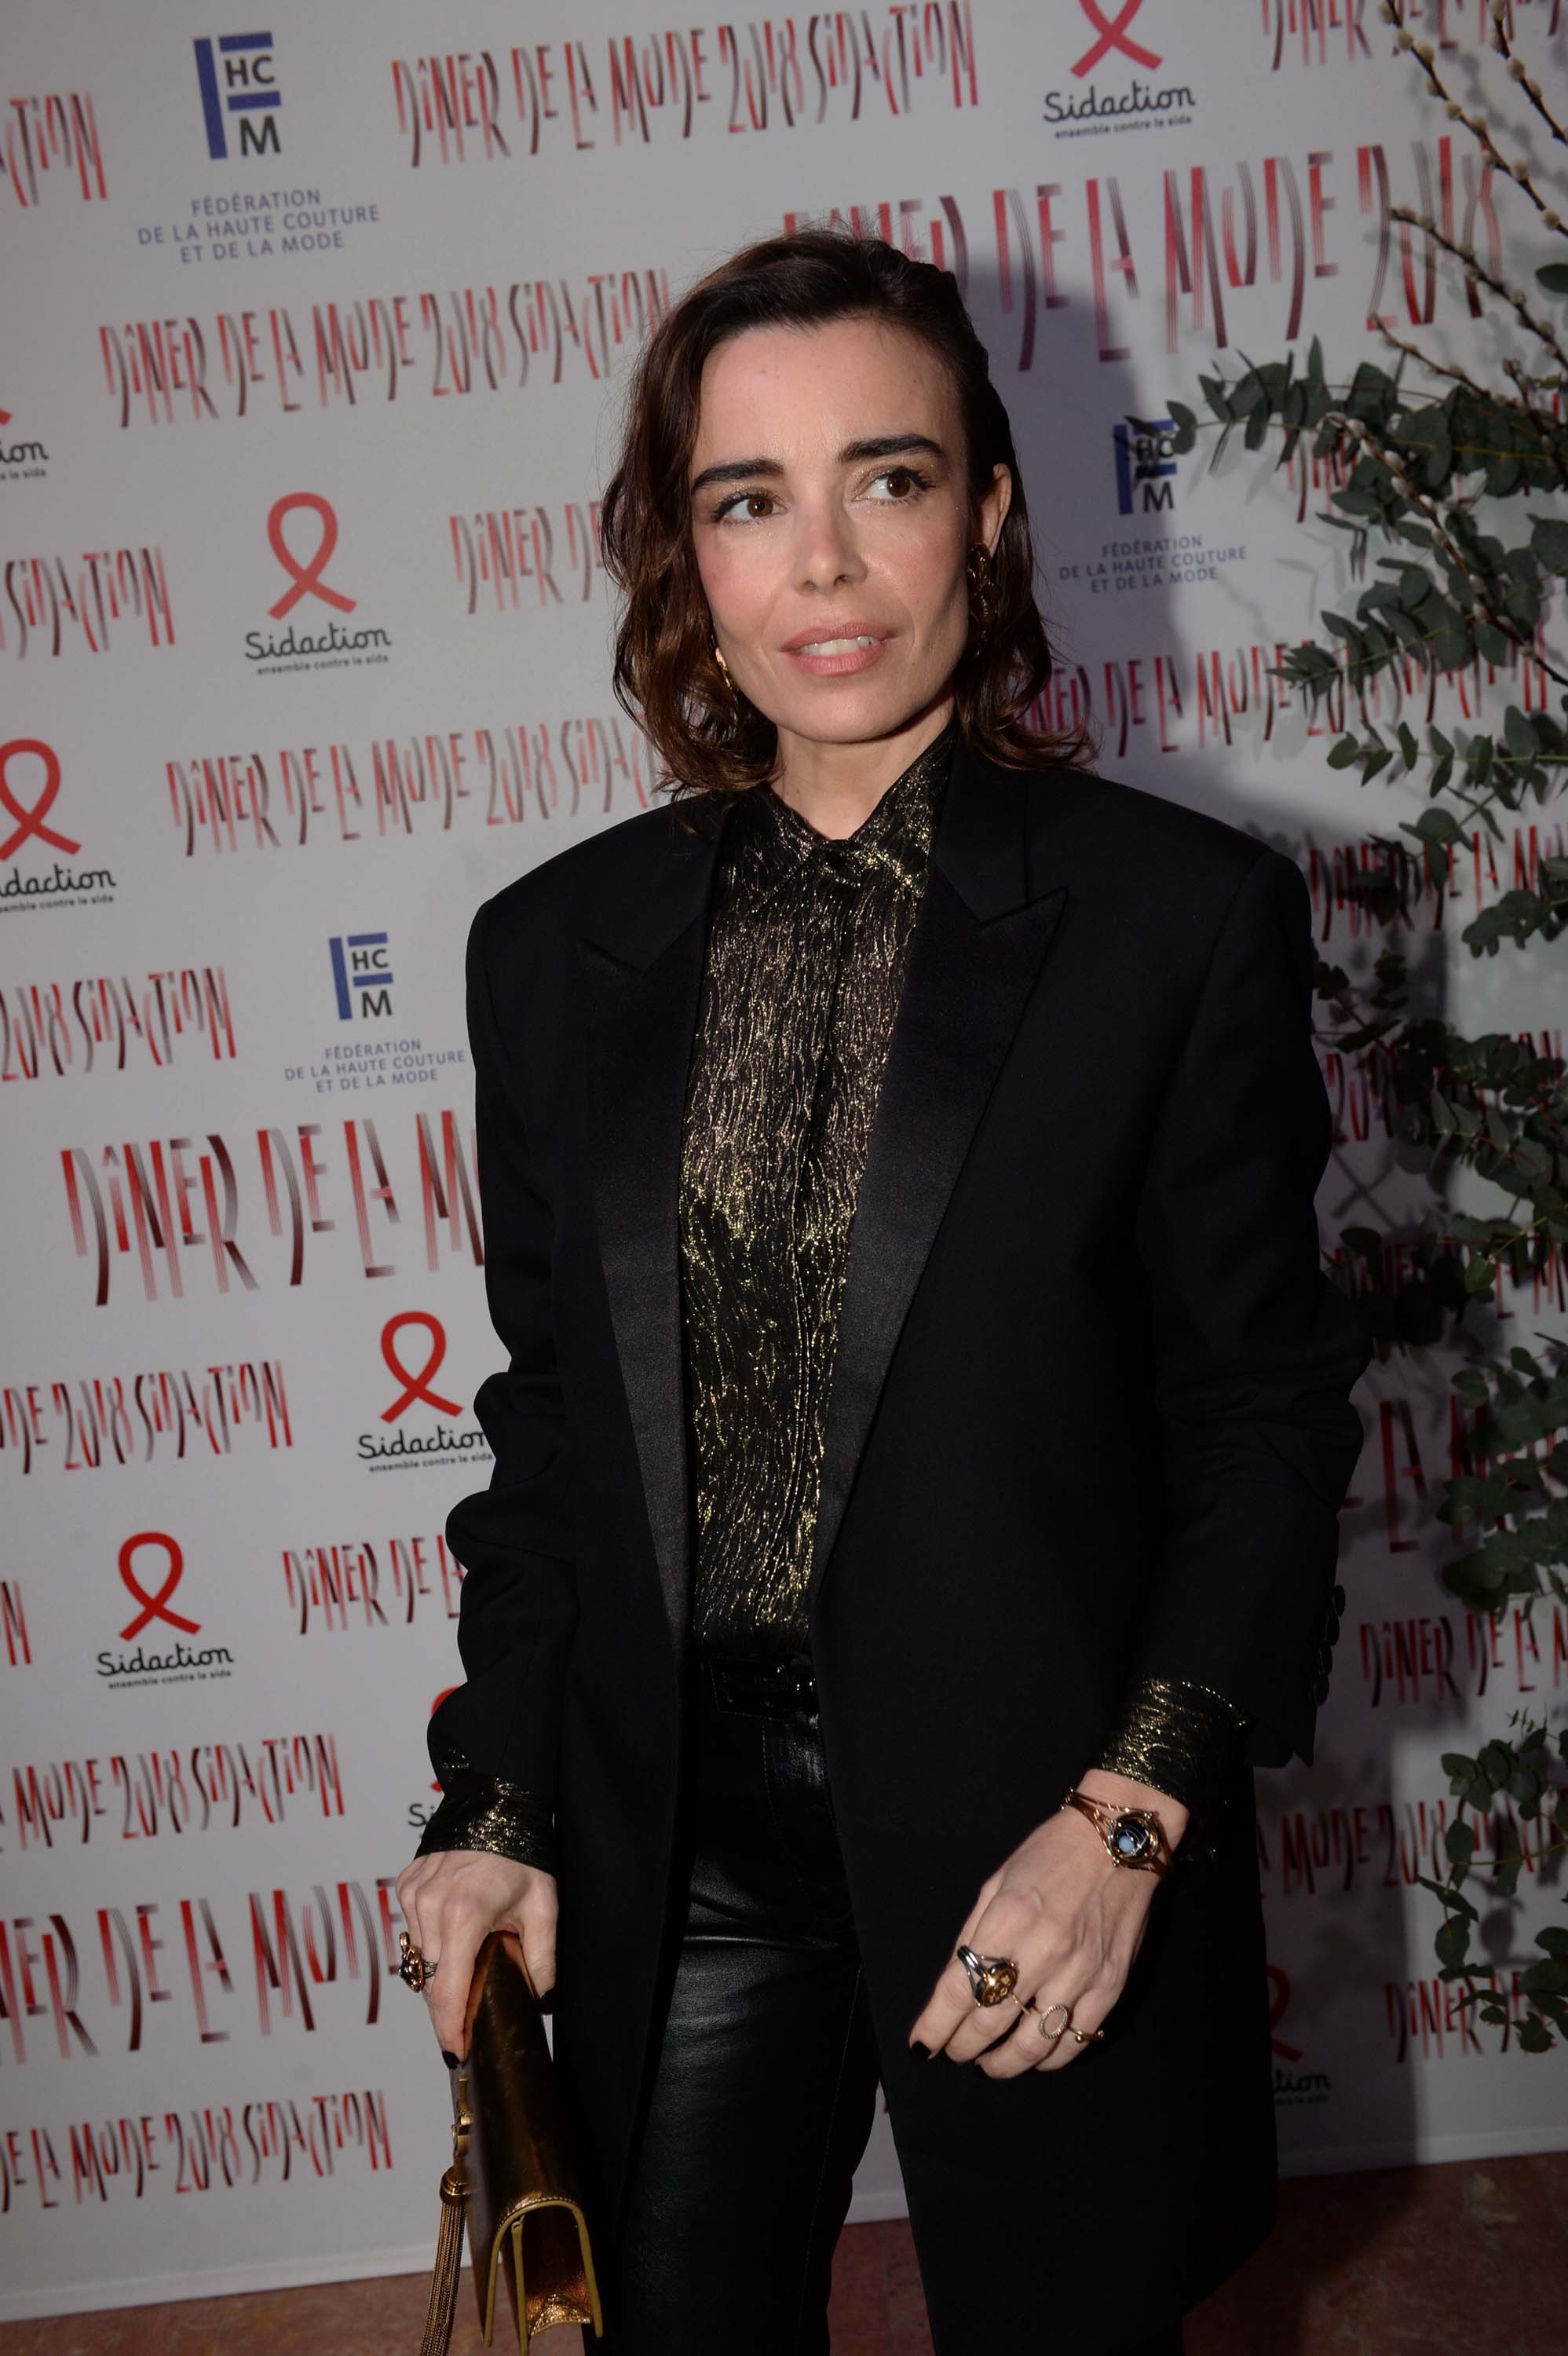 Elodie Bouchez attends 16th Sidaction as part of Paris Fashion Week